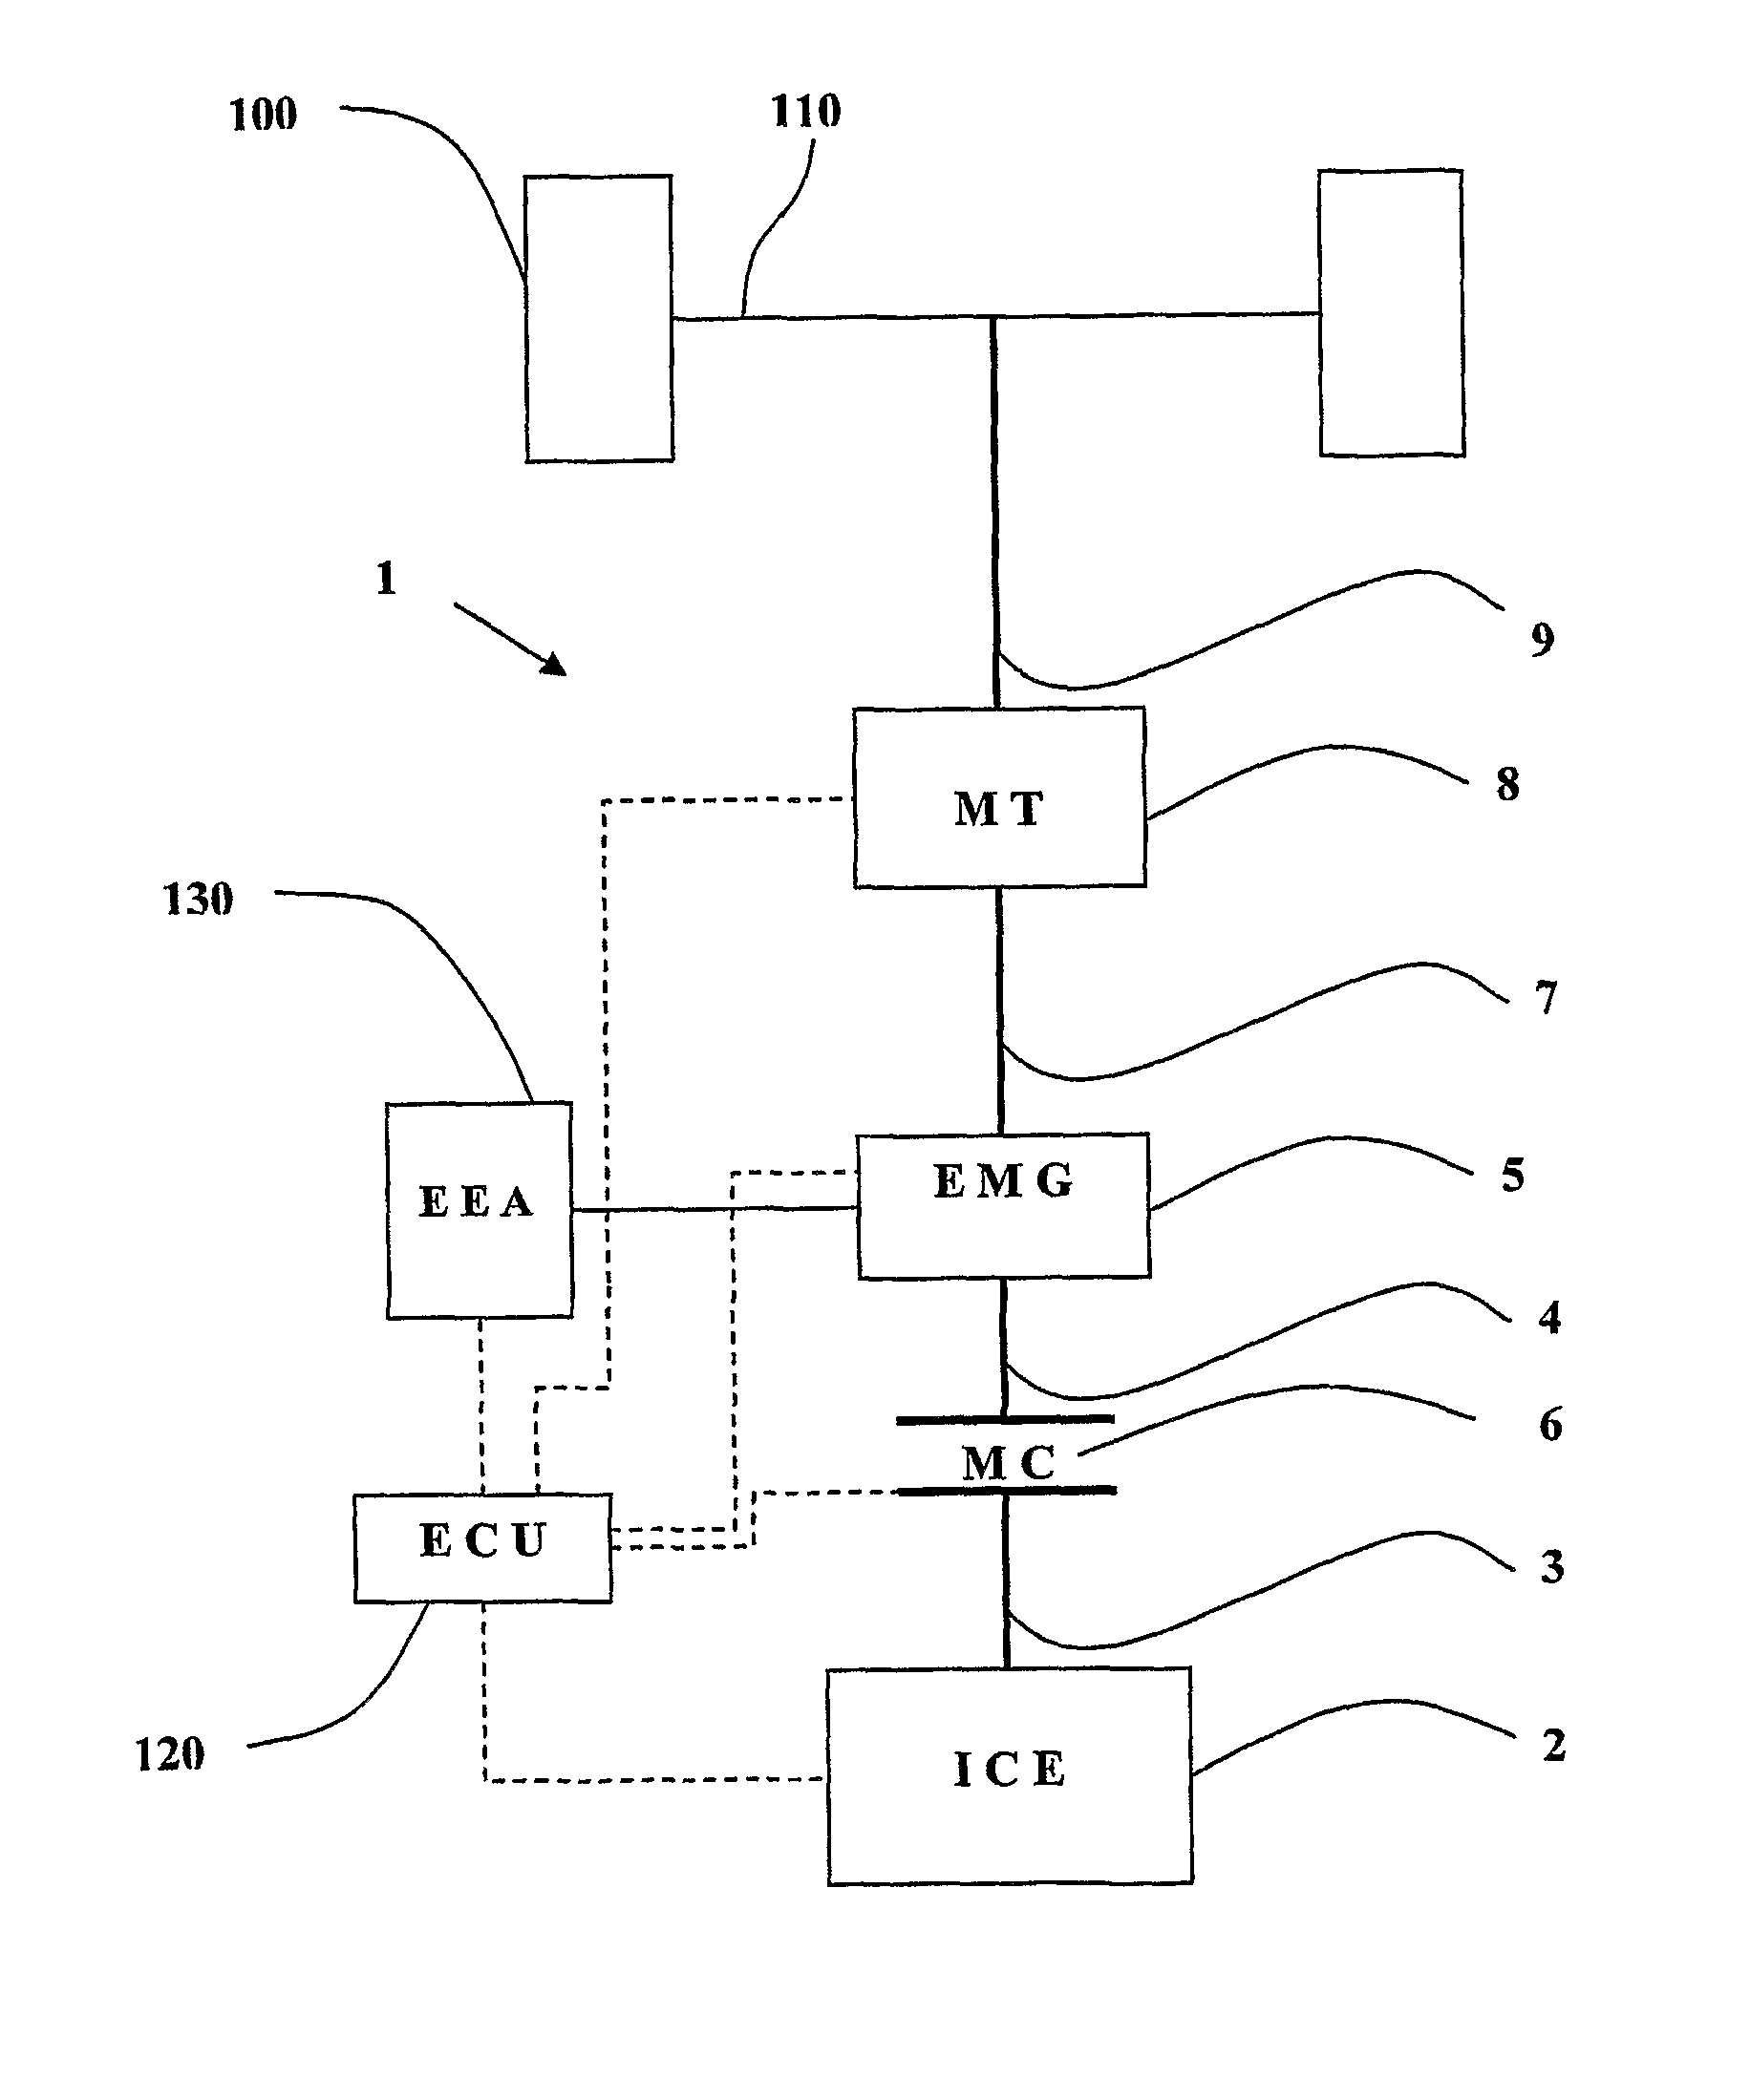 Transmission control system in vehicles